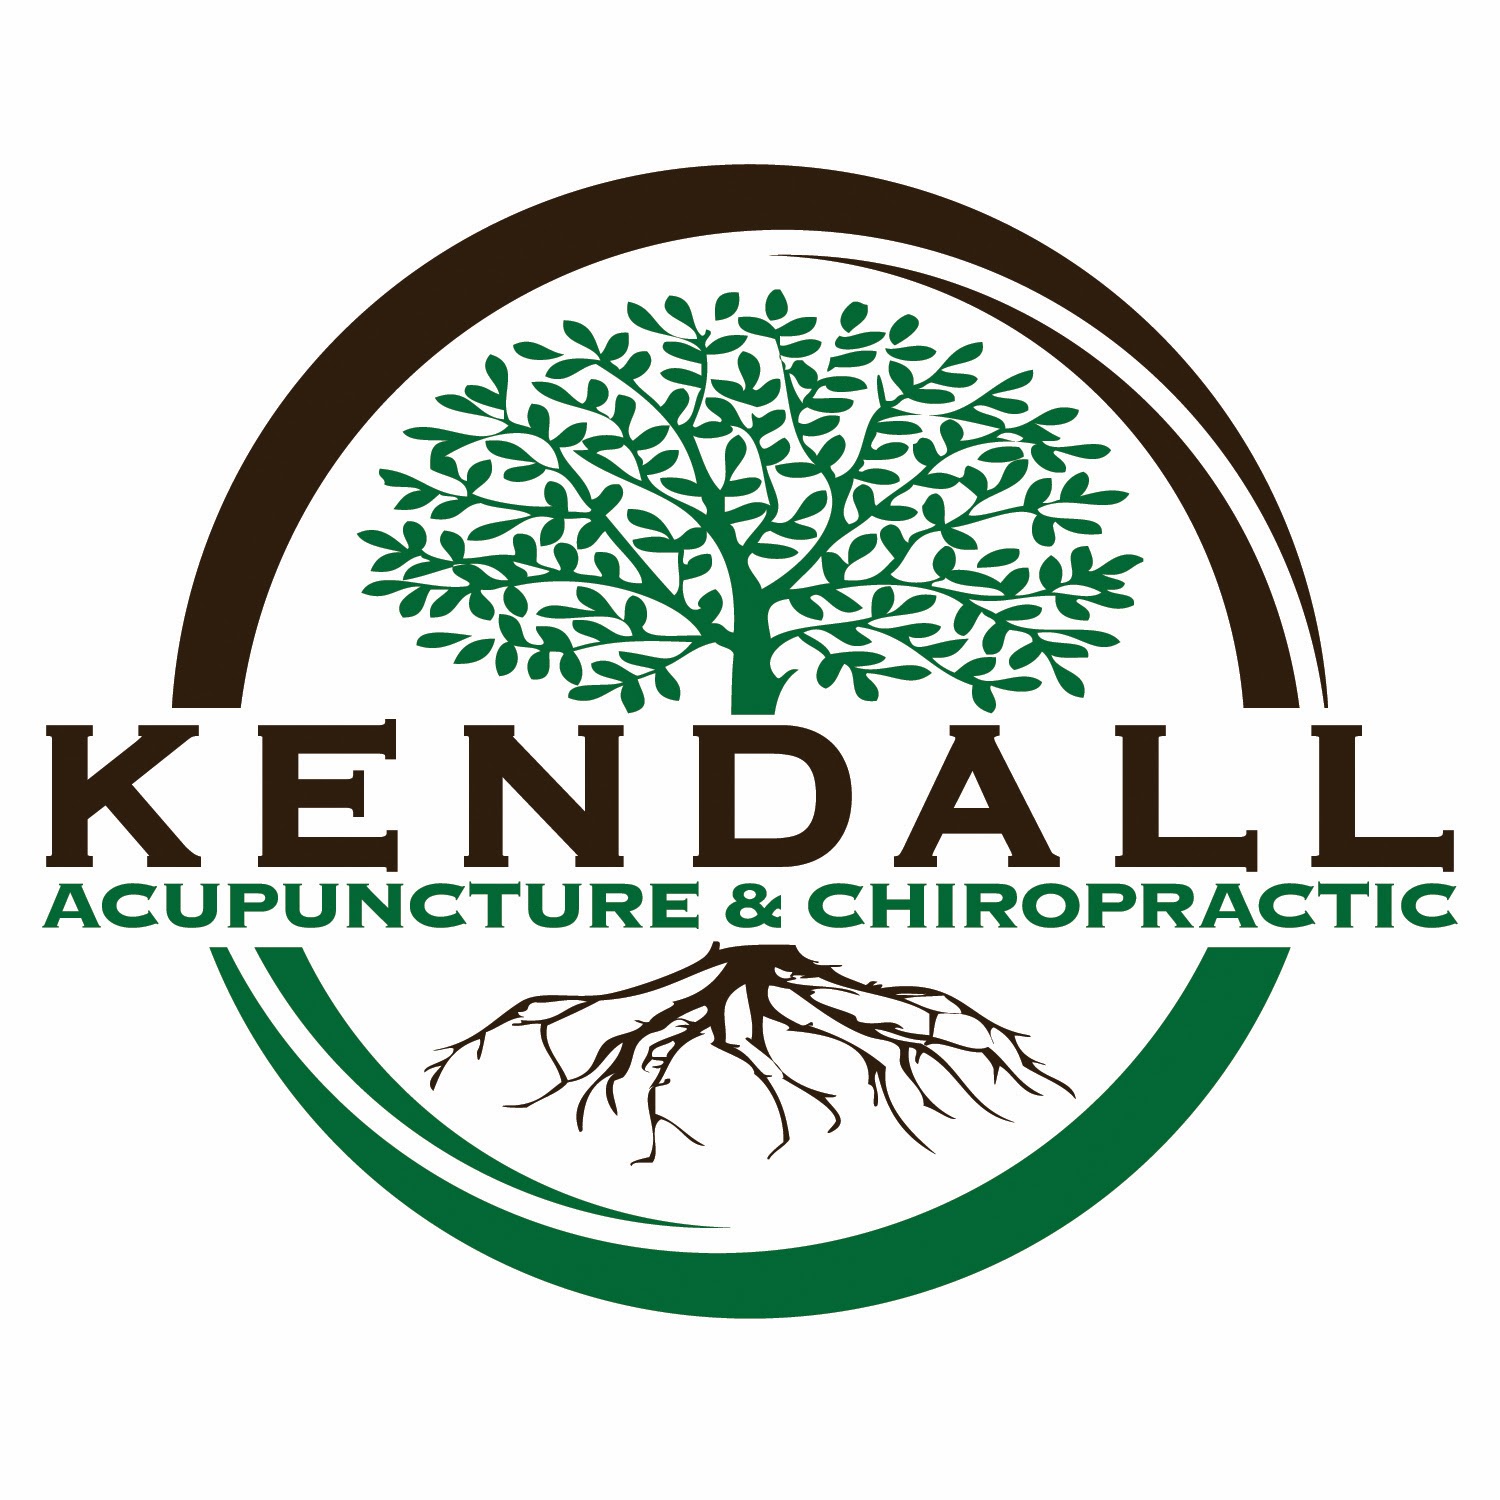 Kendall Acupuncture & Chiropractic